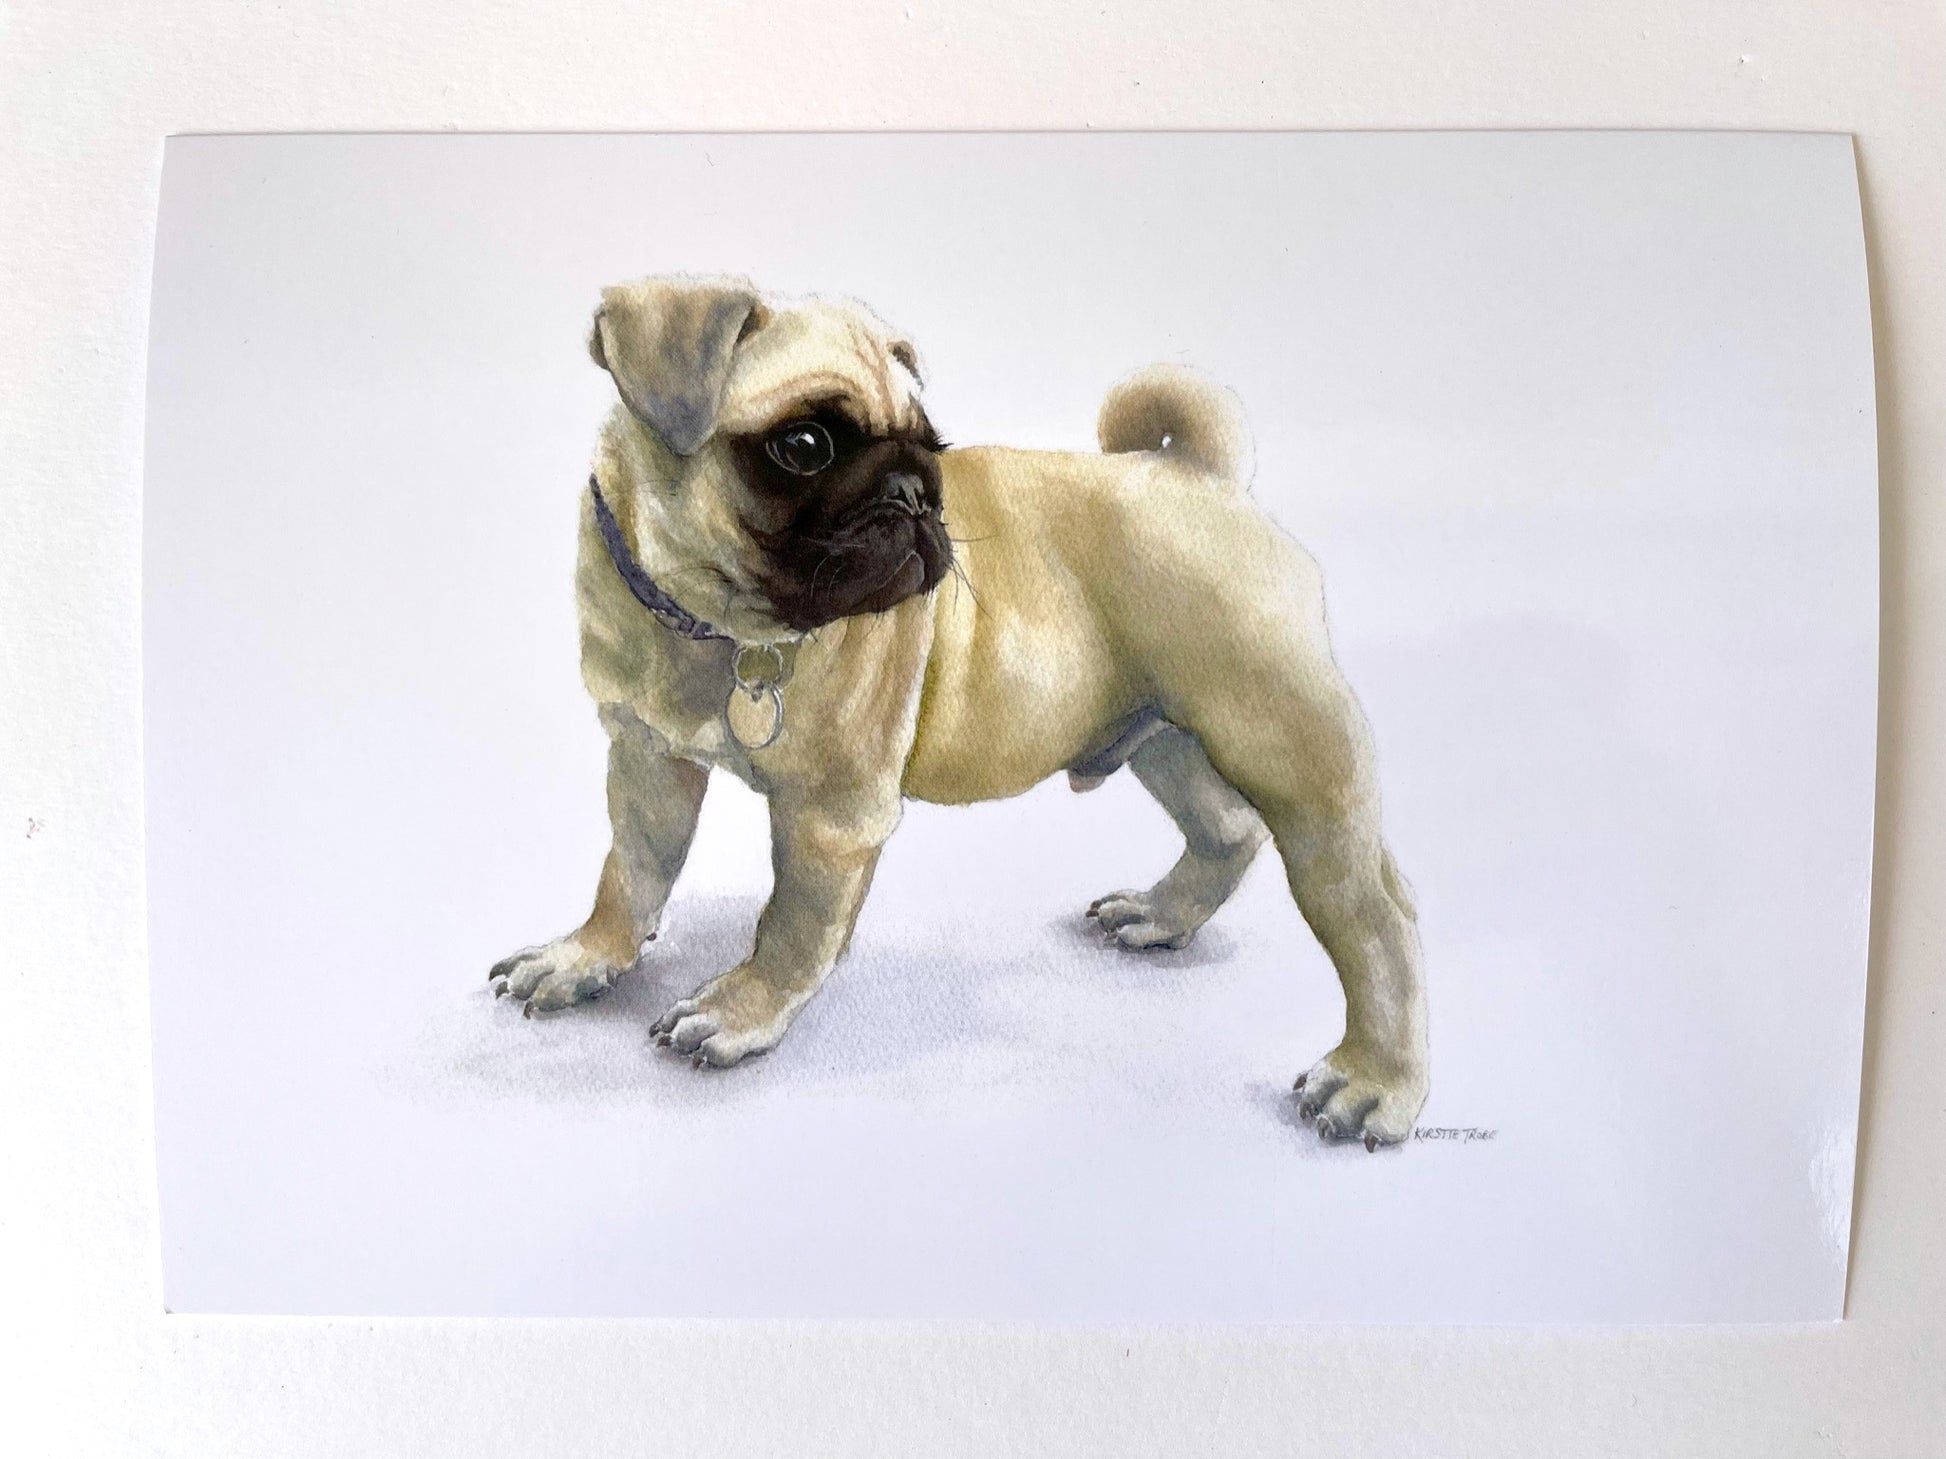 A fawn coloured Pug puppy stands boldly holding his ground whilst turning his head tailwards. Positioned centrally against a white background. Ready for anything, especially treats and cuddles.